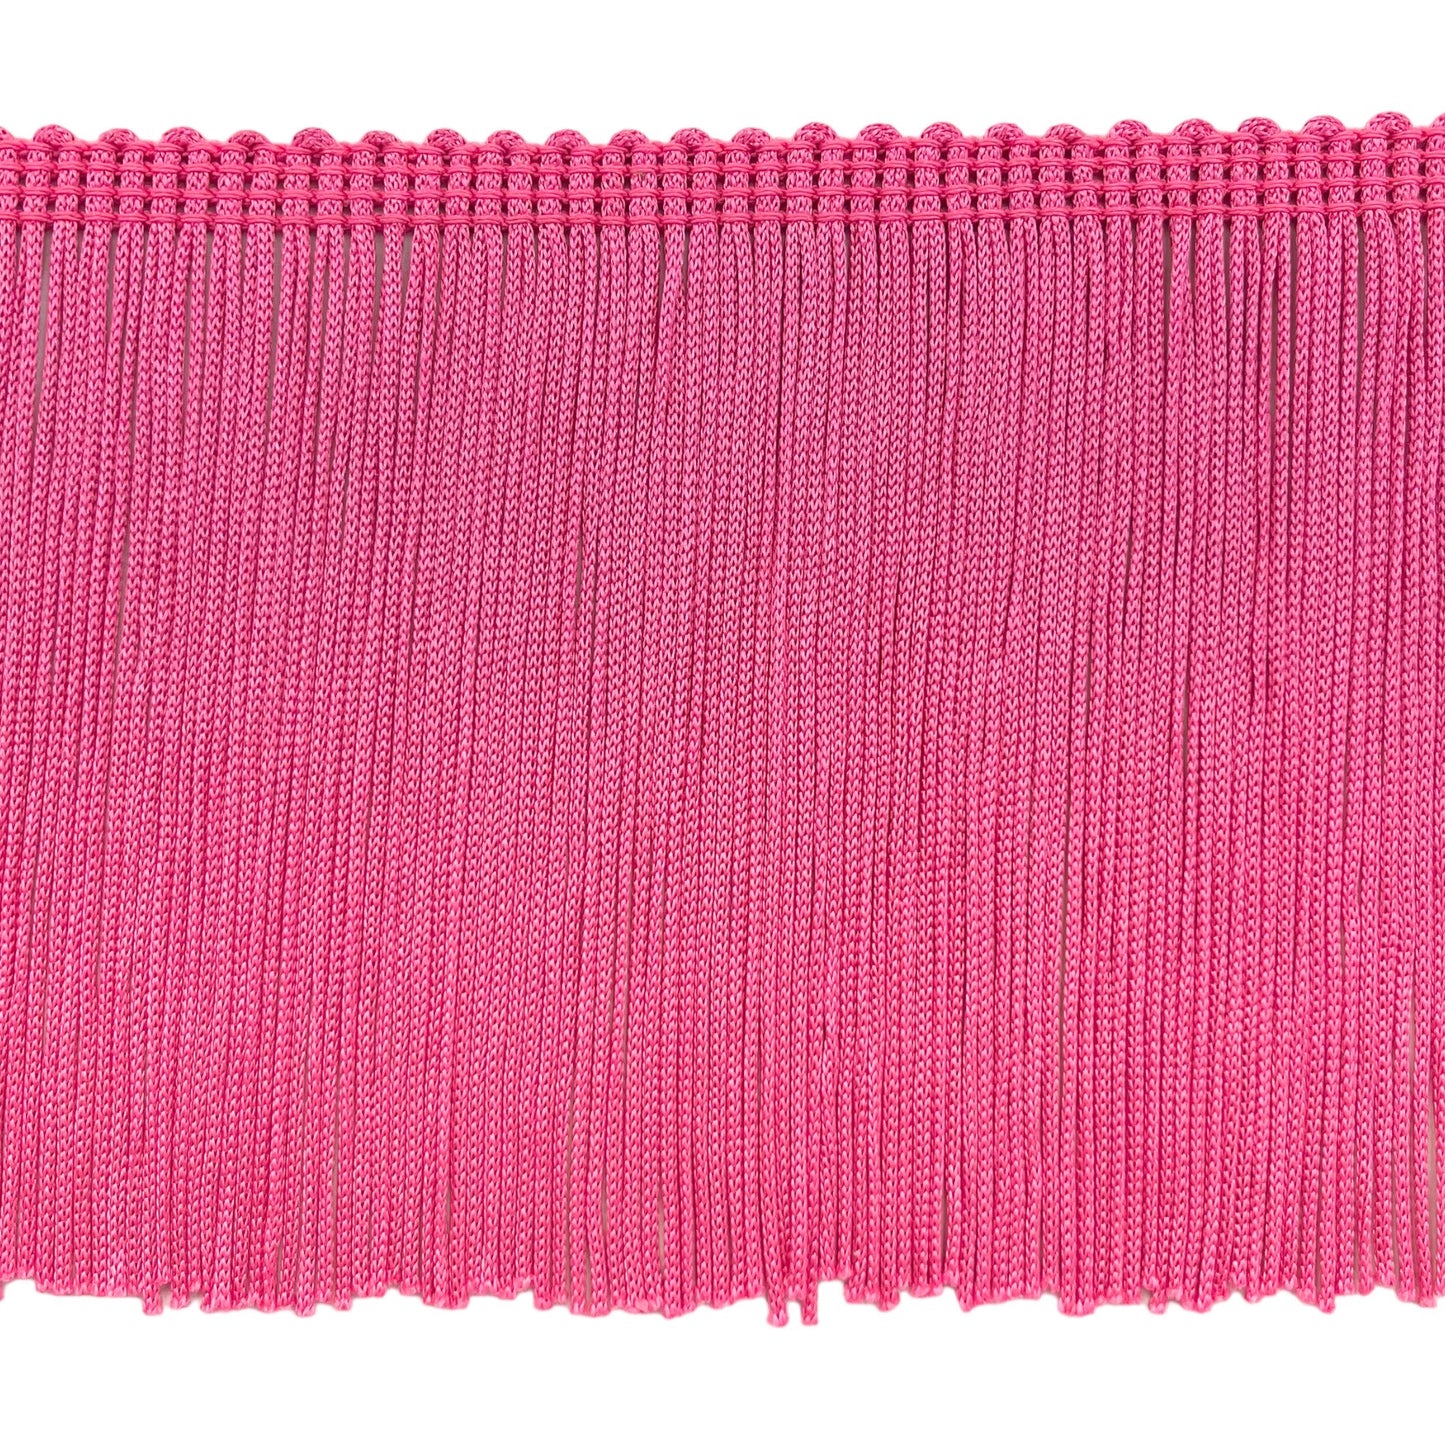 4" Stretch Chainette Fringe Trim (Sold by the Yard)